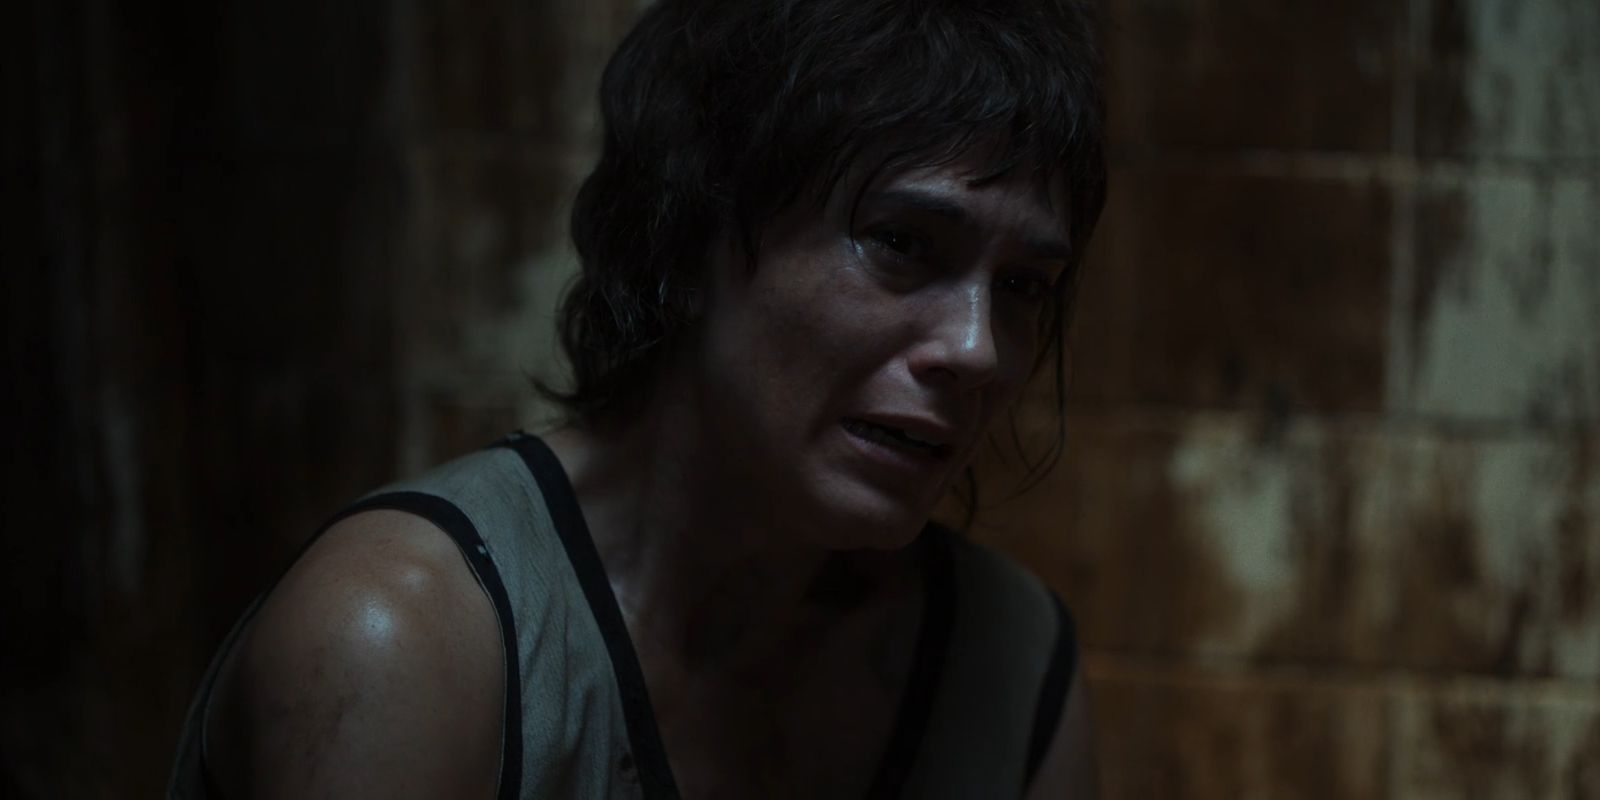 Carla cries and looks disheveled in Red Queen